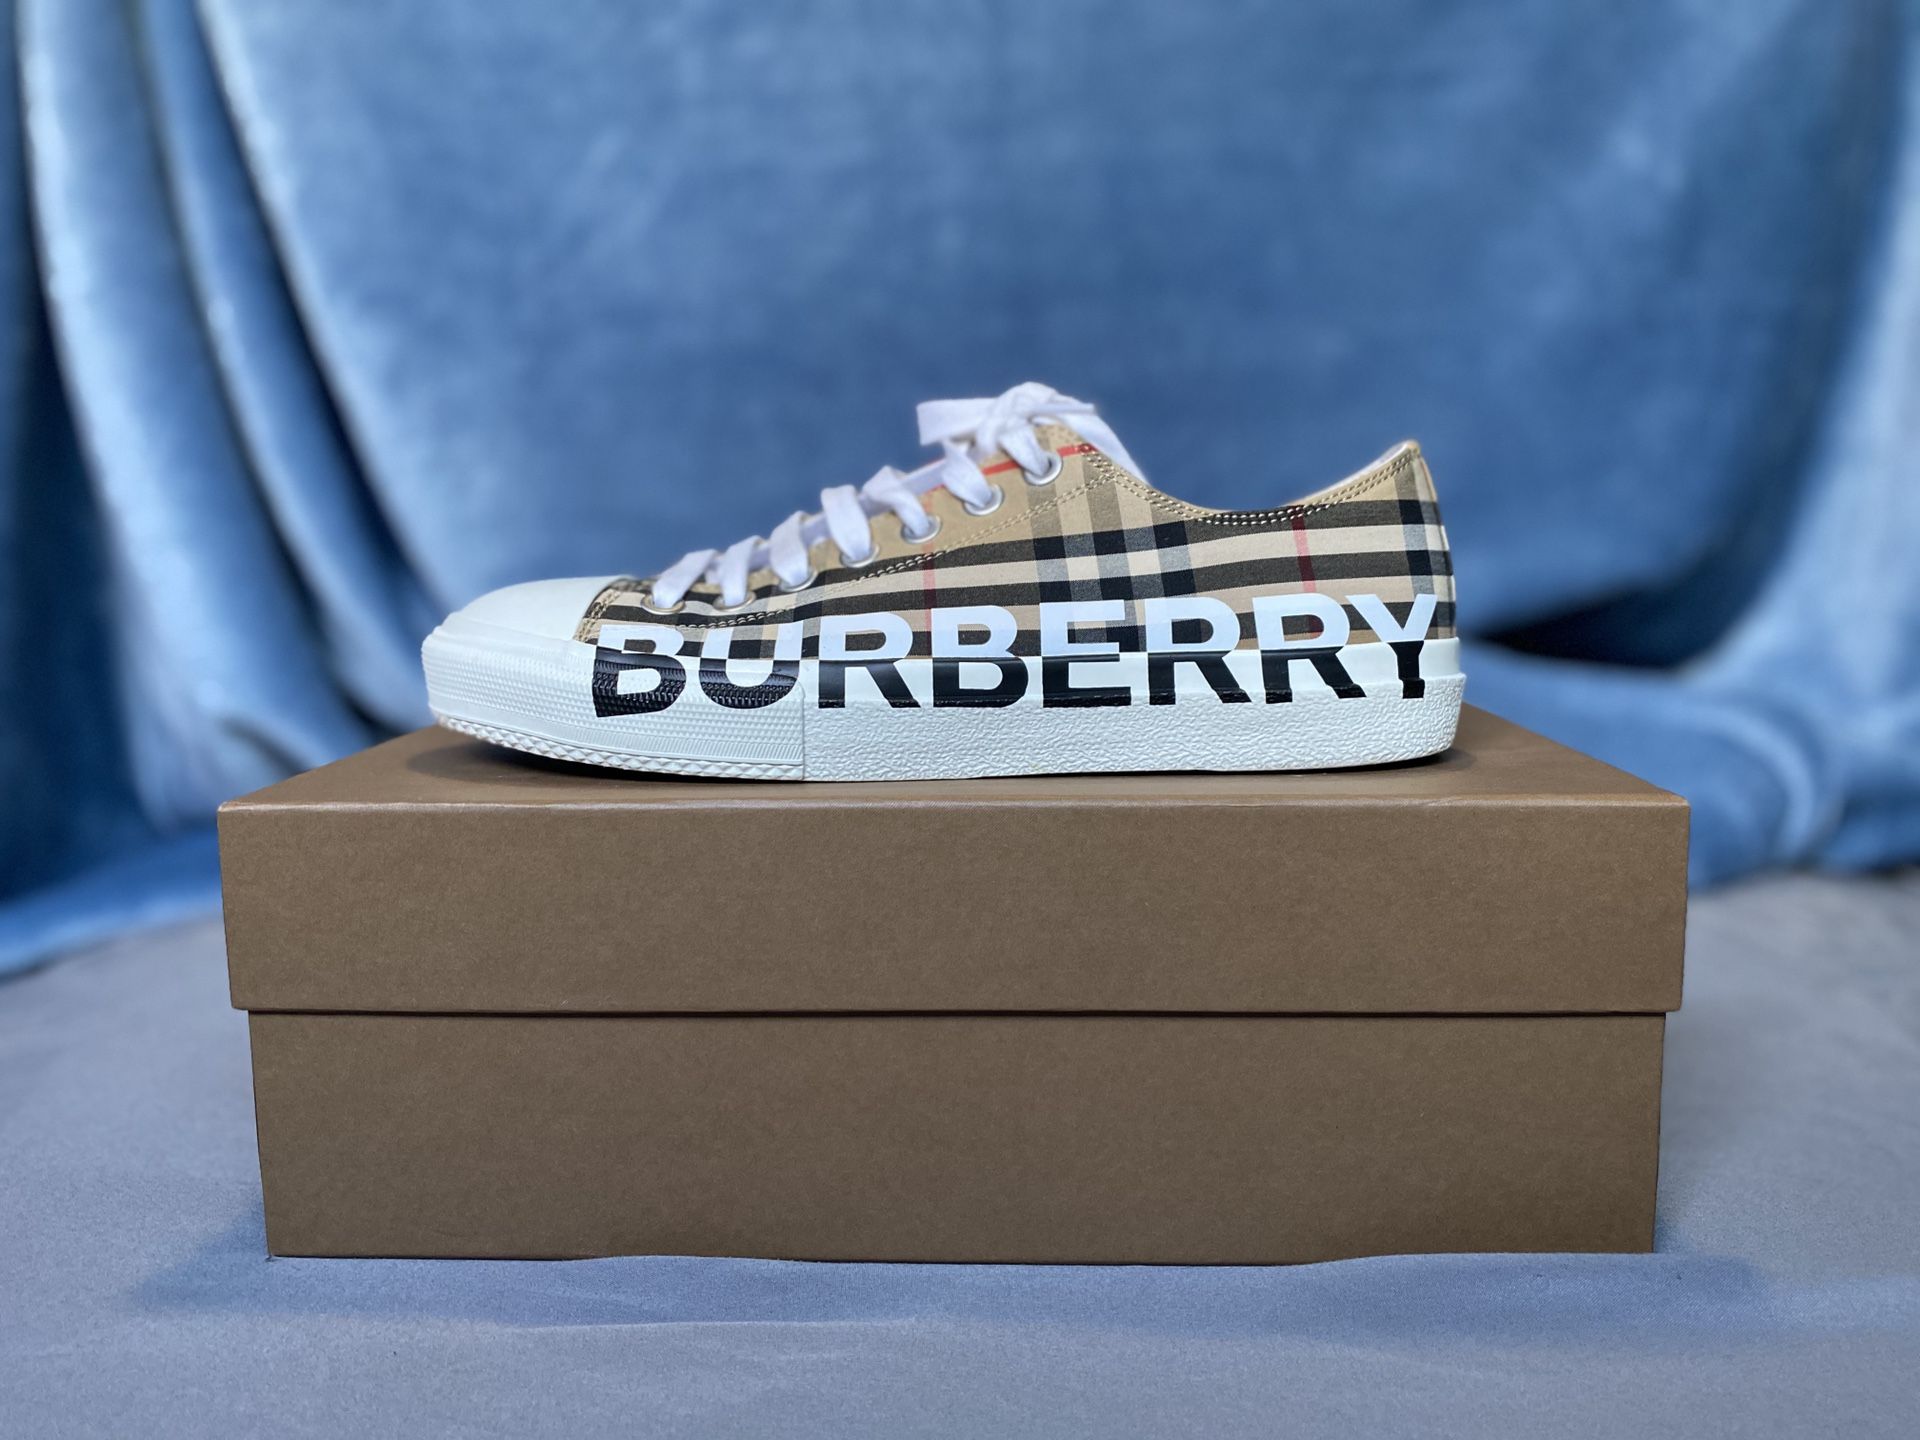 Burberry Low Top Sneakers Size 9